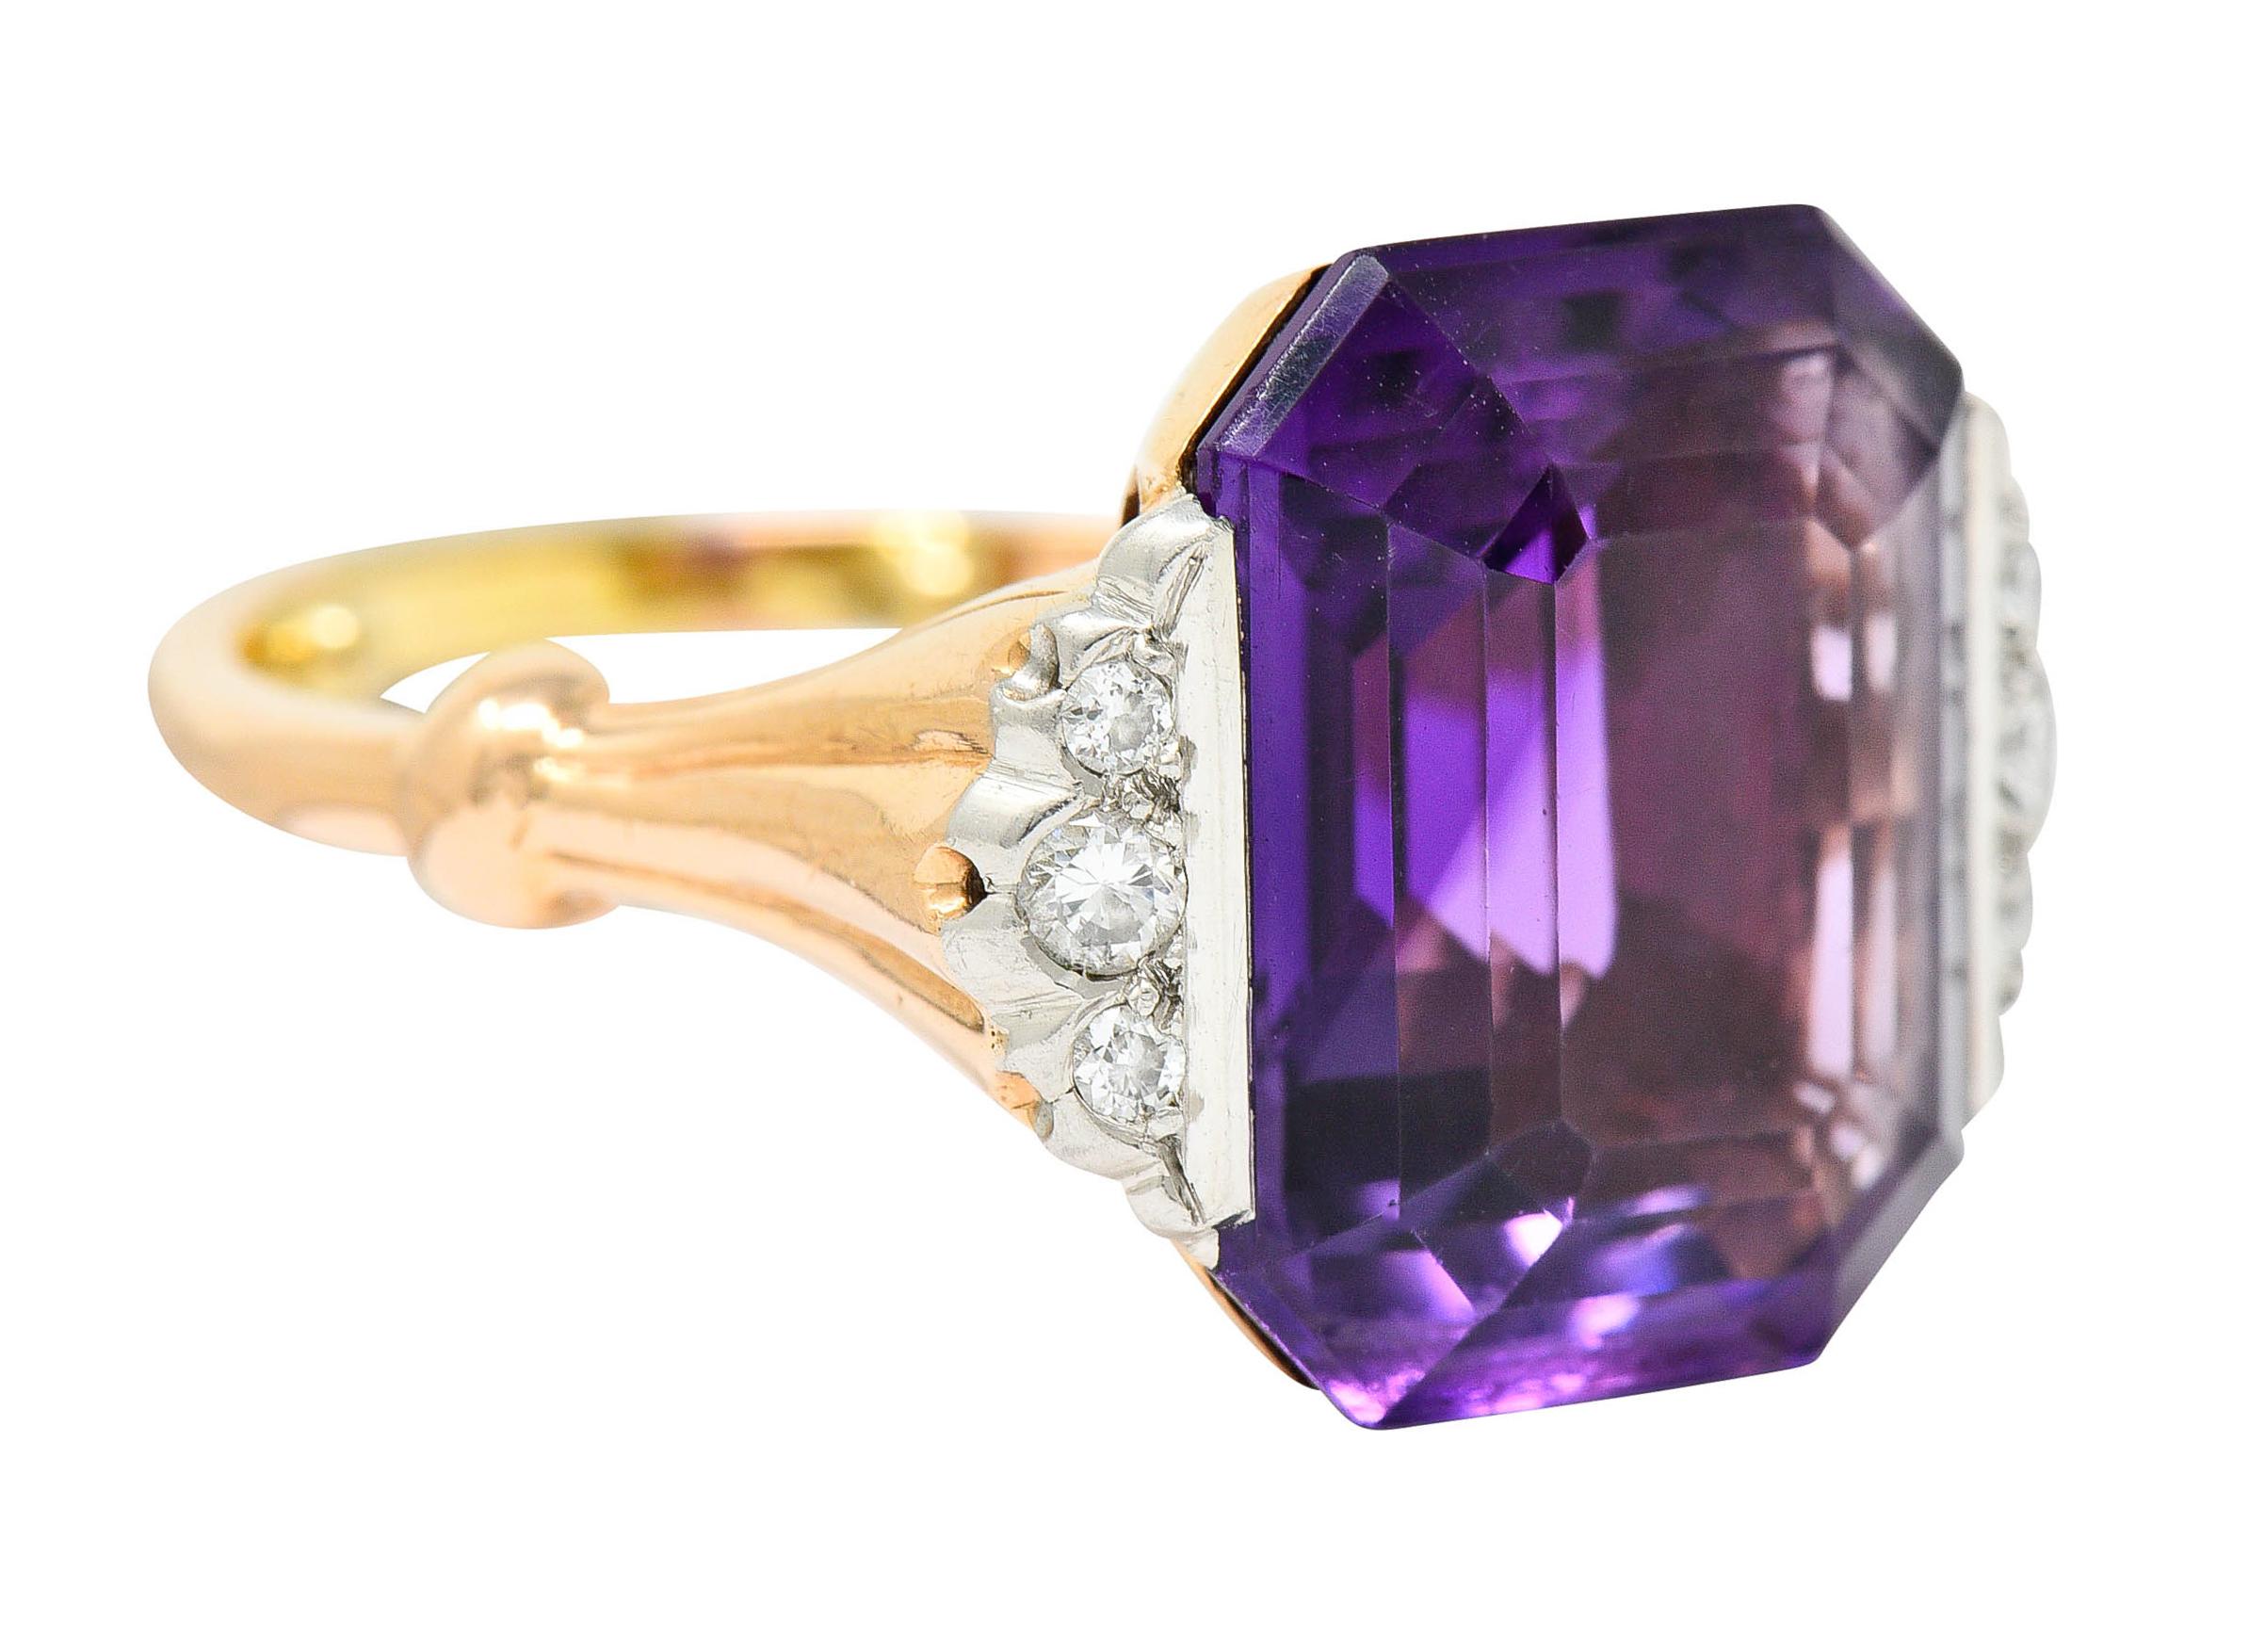 Centering an emerald cut amethyst measuring approximately 15.1 x 12.1 mm

Transparent with striking and uniform purple color

Flanked by scalloped platinum accented with round brilliant cut sapphires

Weighing in total approximately 0.18 carat - eye